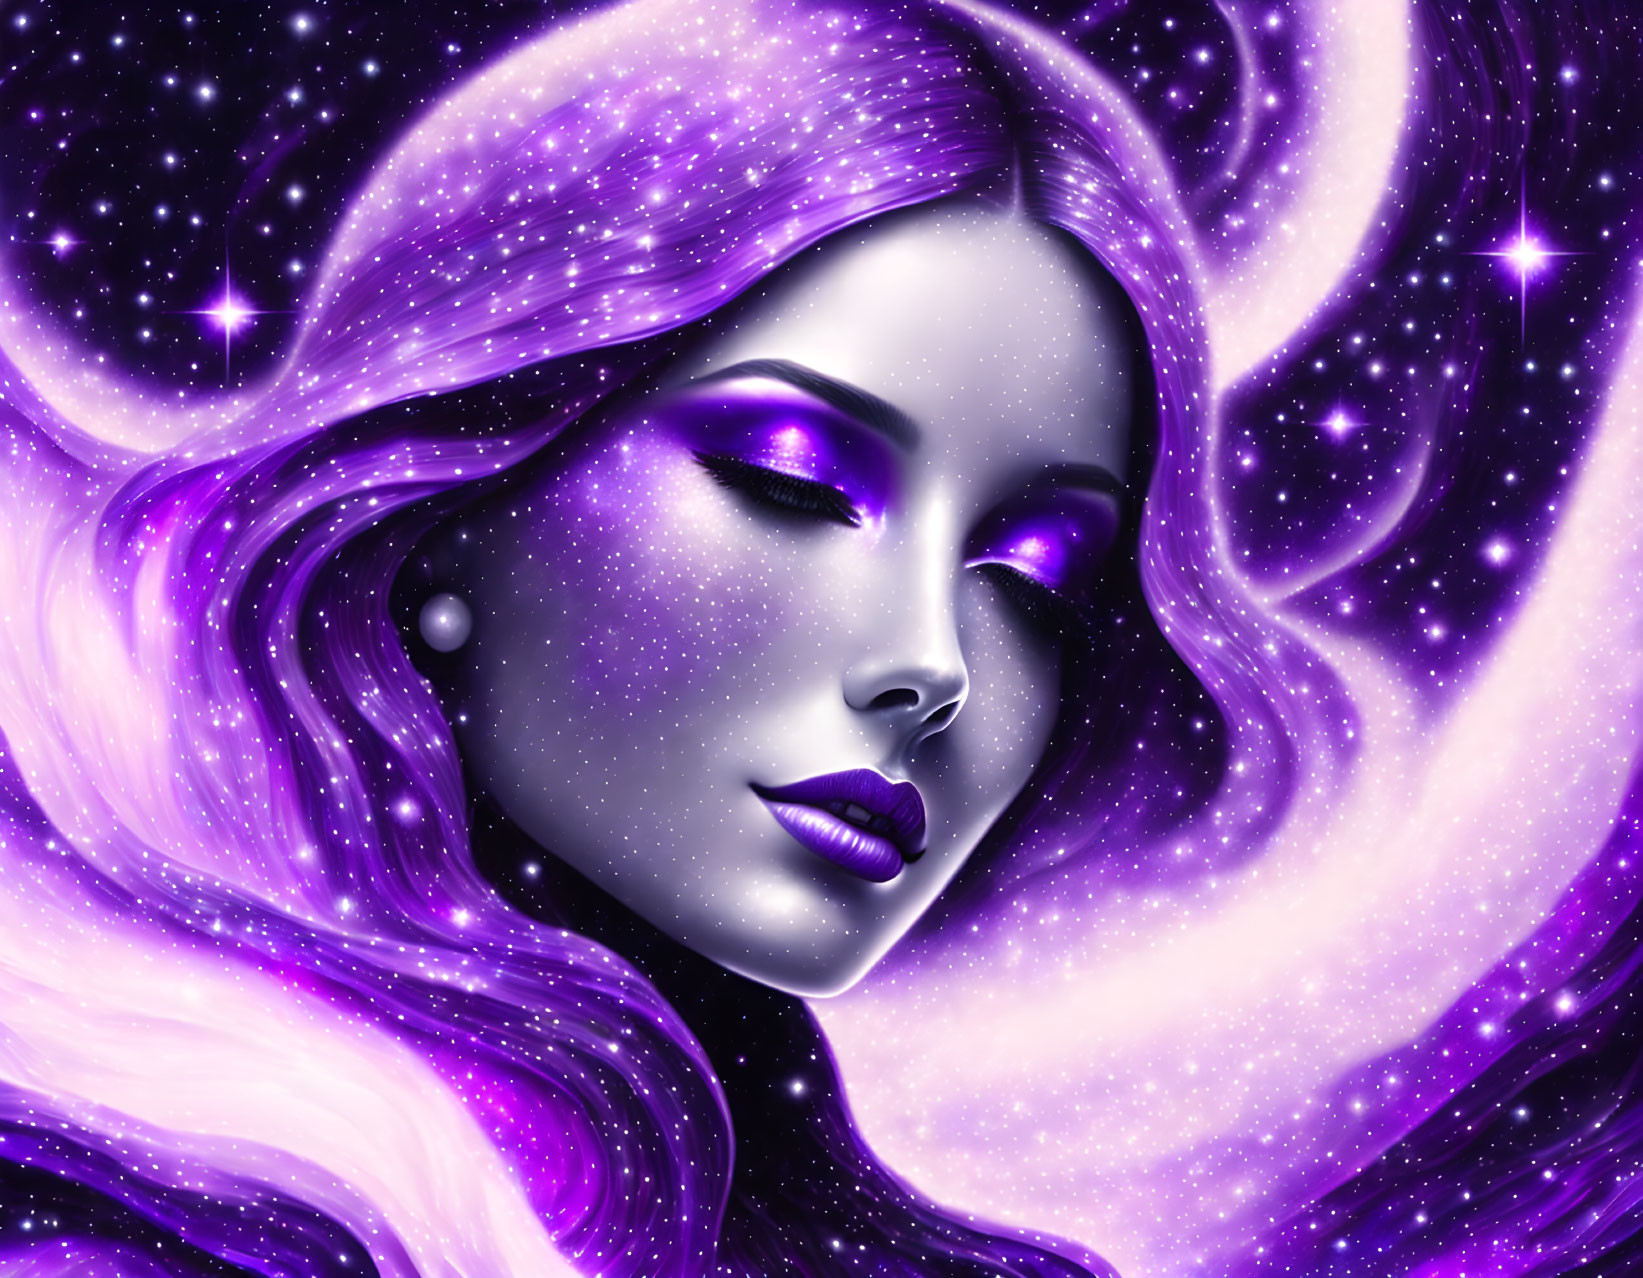 Purple-skinned woman in cosmic setting with mystical aura.